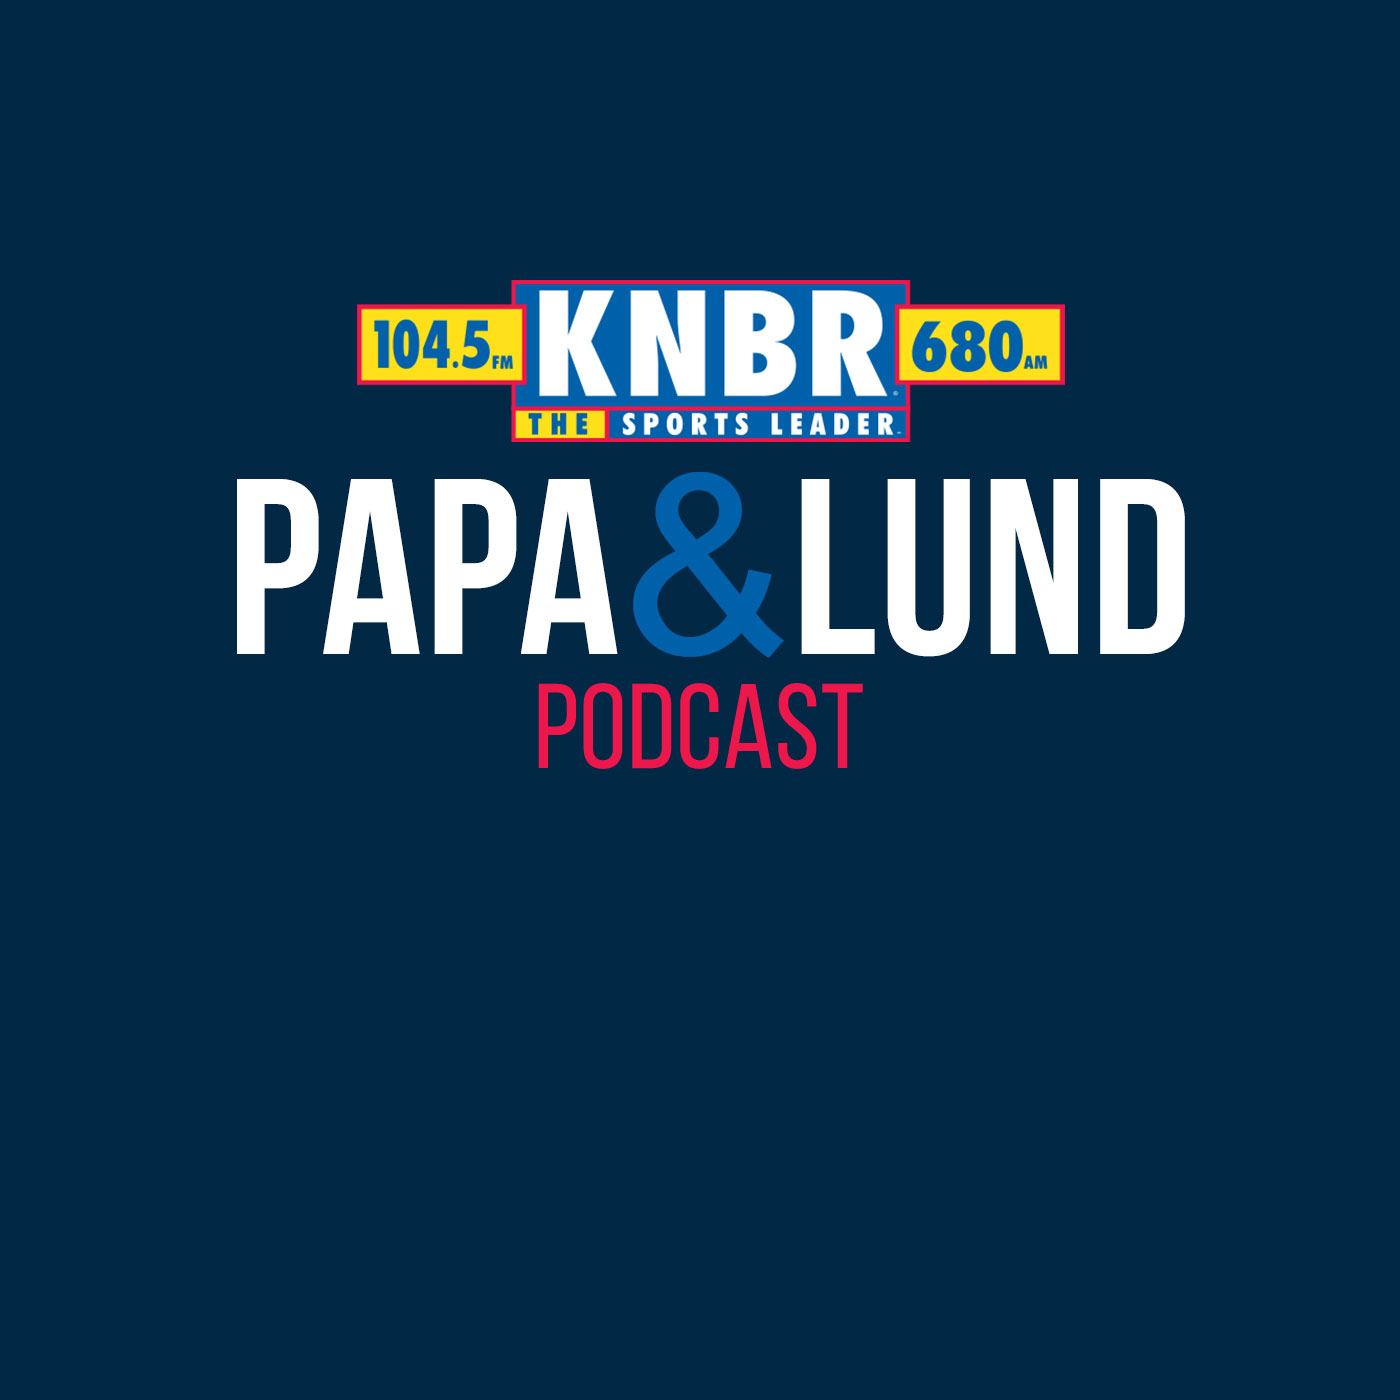 2-3 Ron Wotus joins Papa & Lund to discuss the outlook on the Giants season and how the new rule changes will factor in for this upcoming season